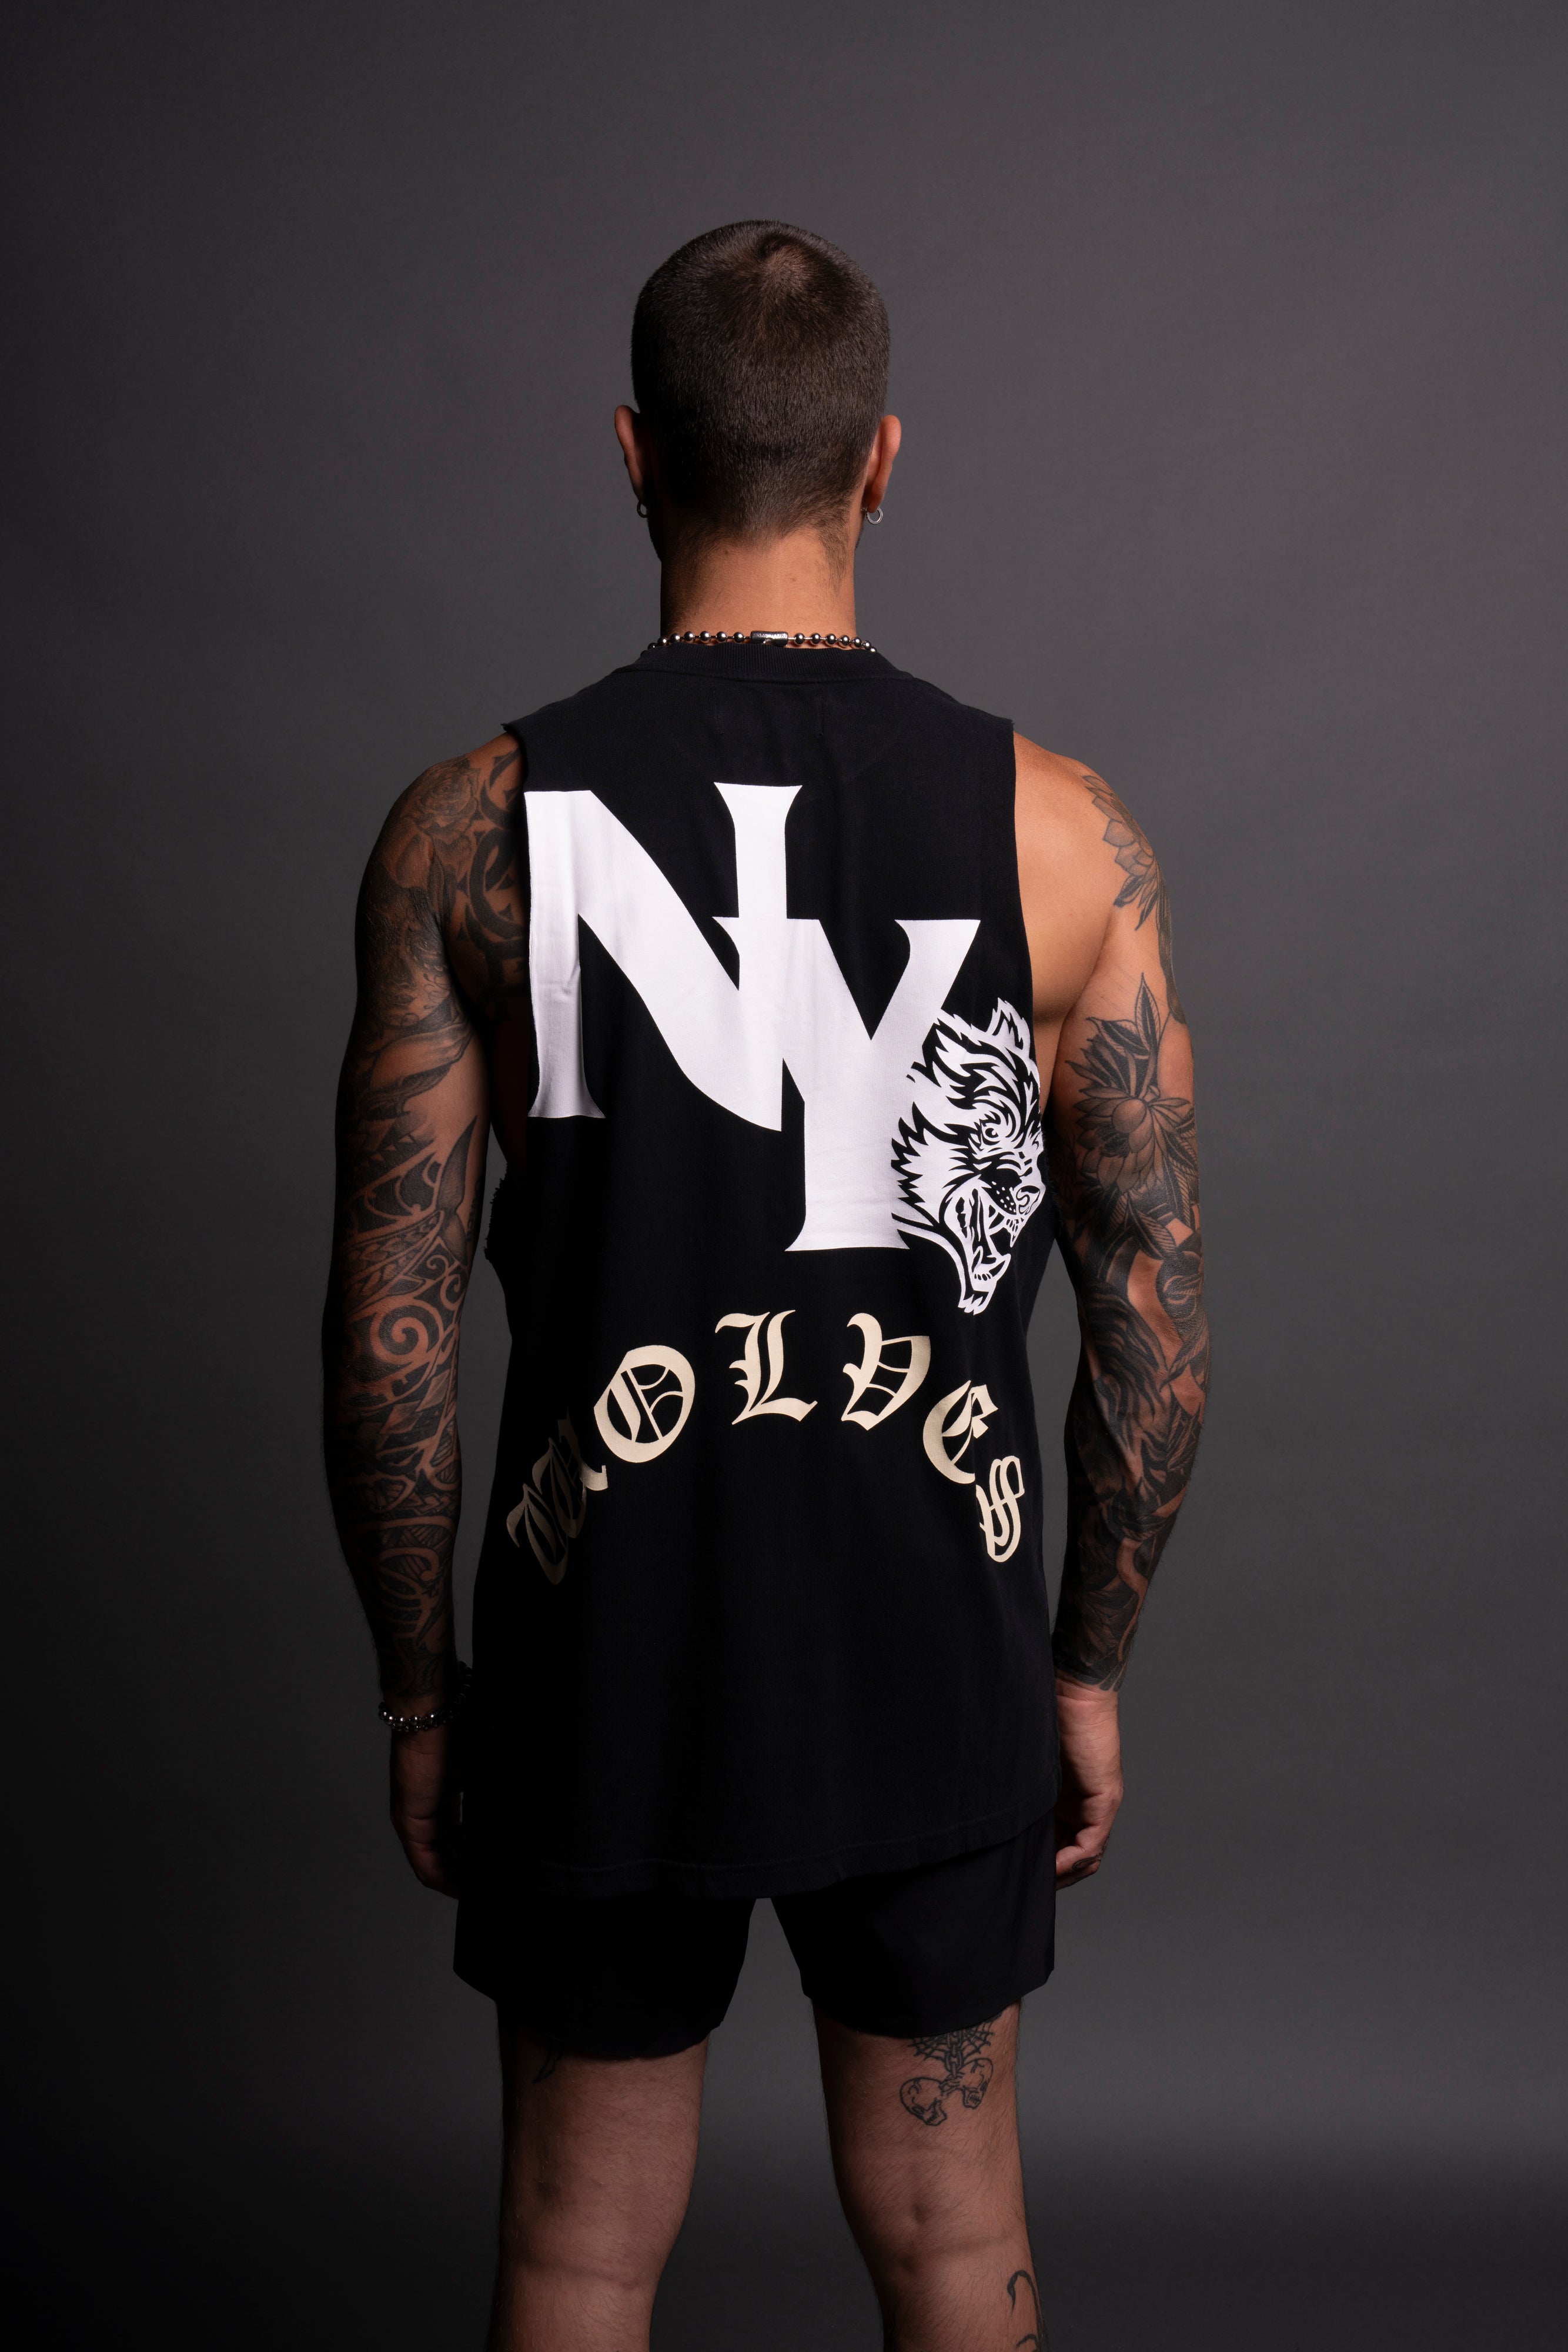 NY Wolves "Tommy" Muscle Tee in Black